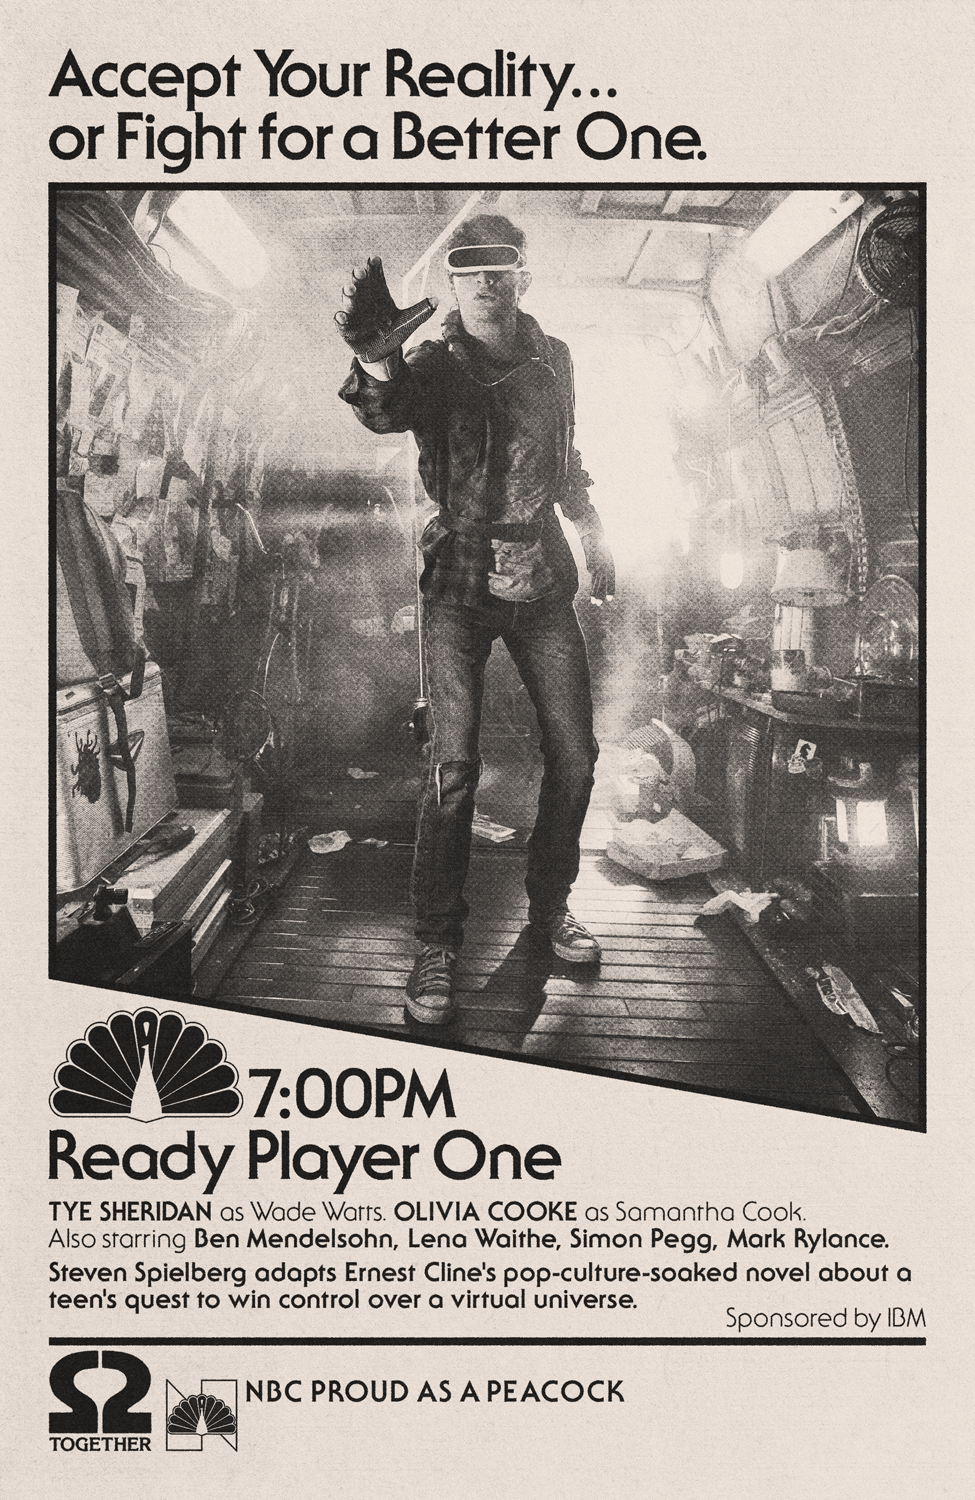 Ready Player One' Nostalgic Movie Posters